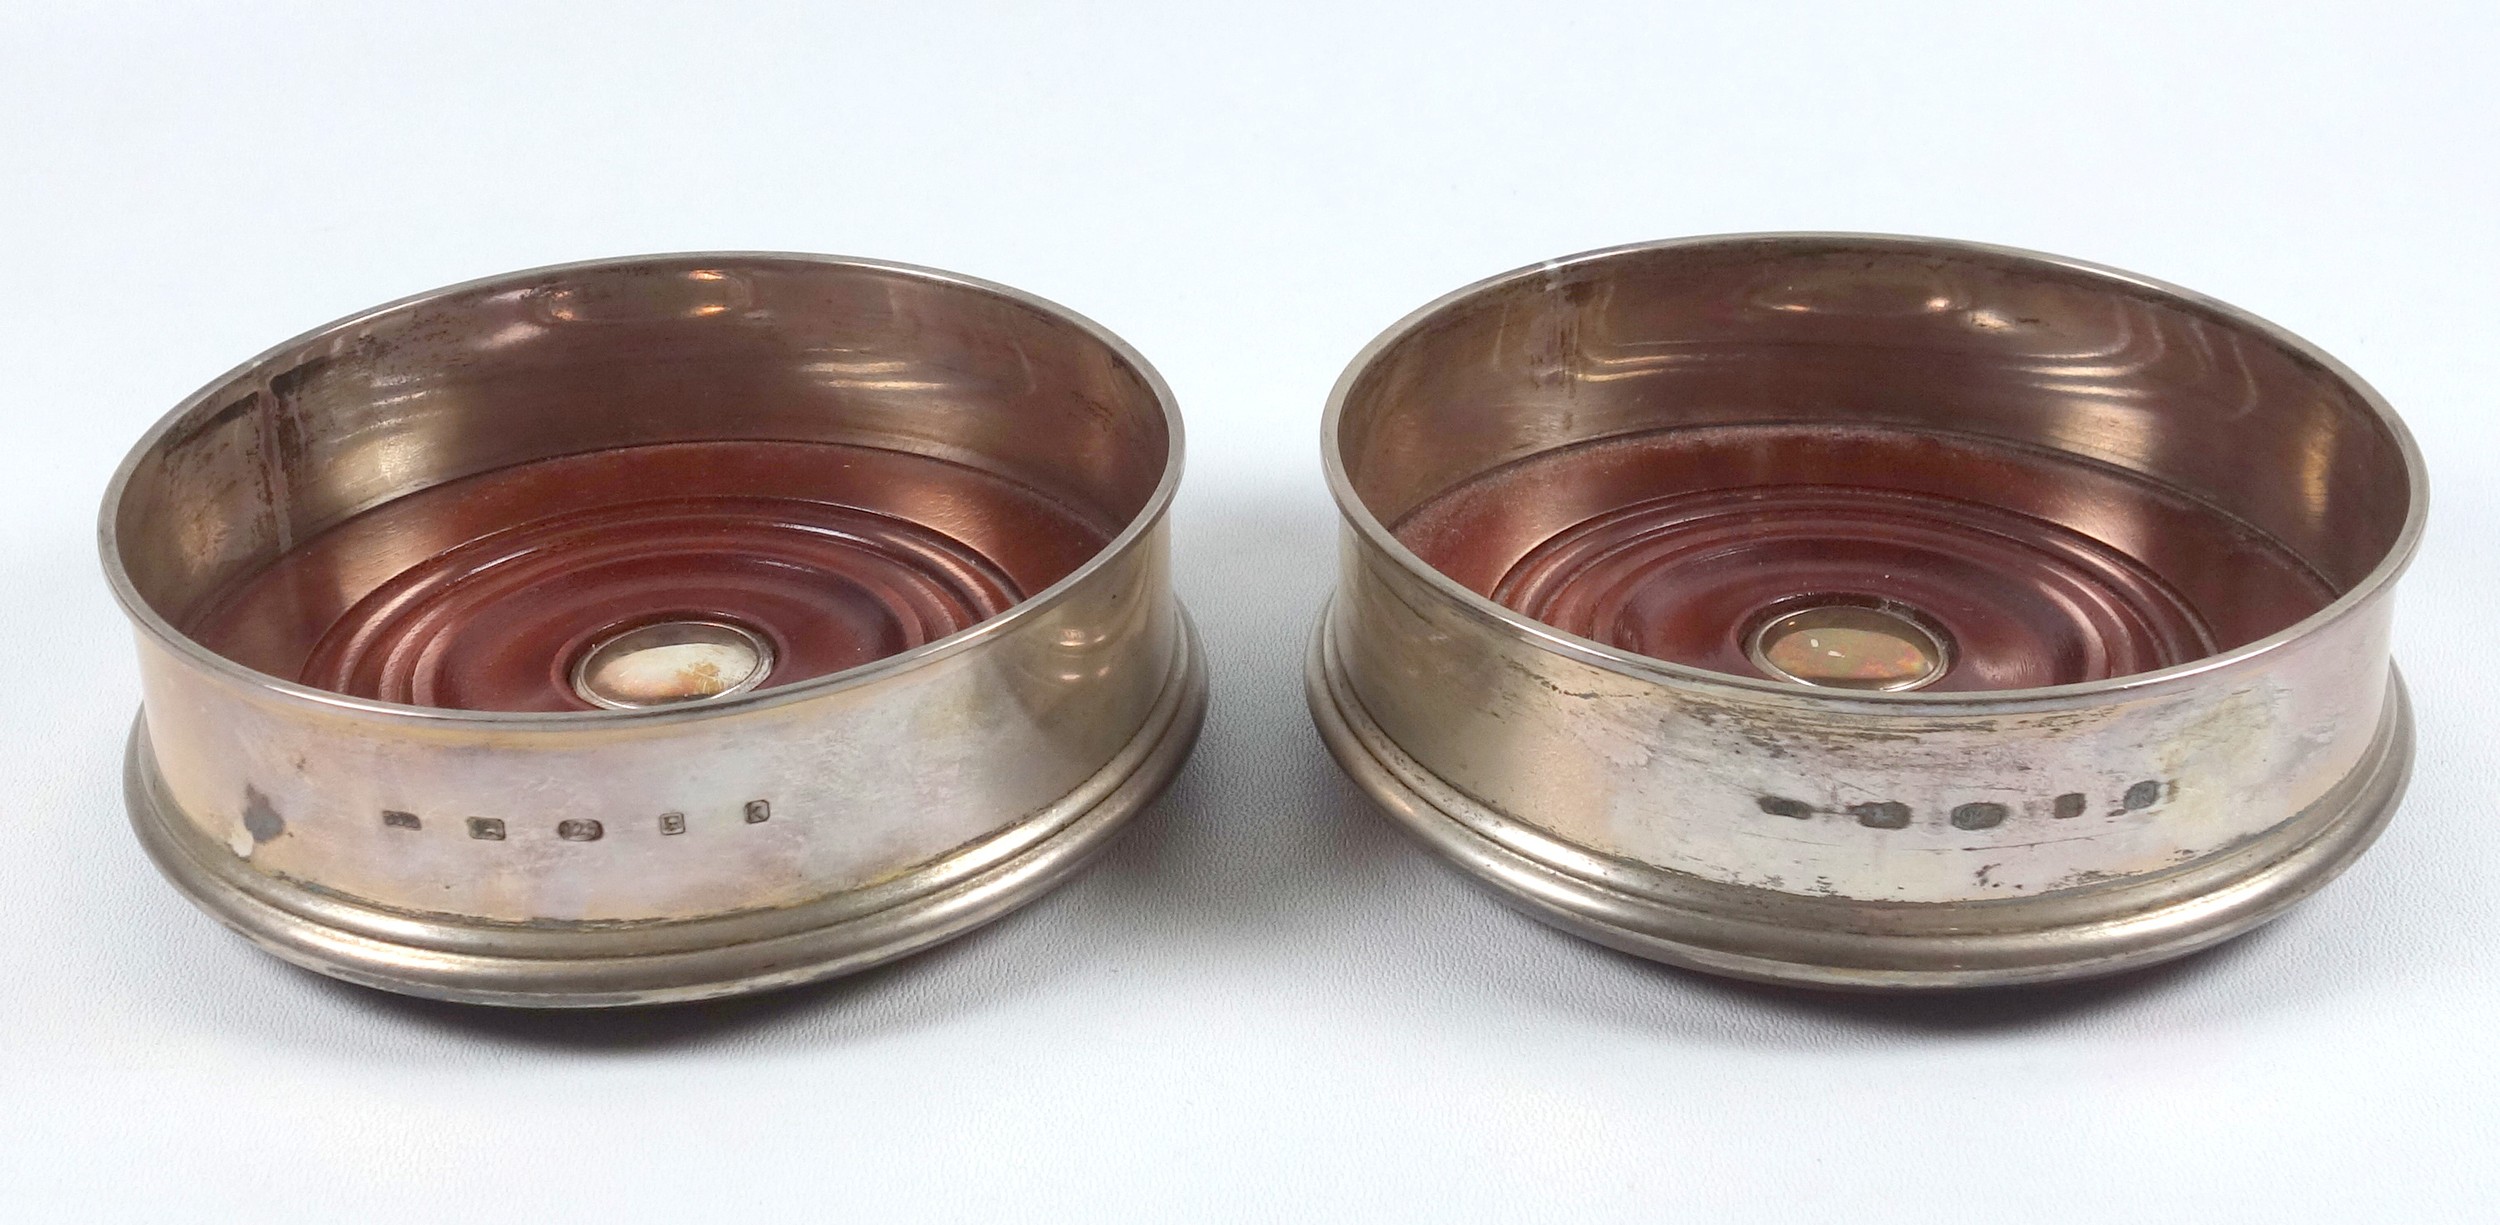 Pair of silver circular coasters, each with a turned mahogany base, by J Bull Ltd, London 2009, D